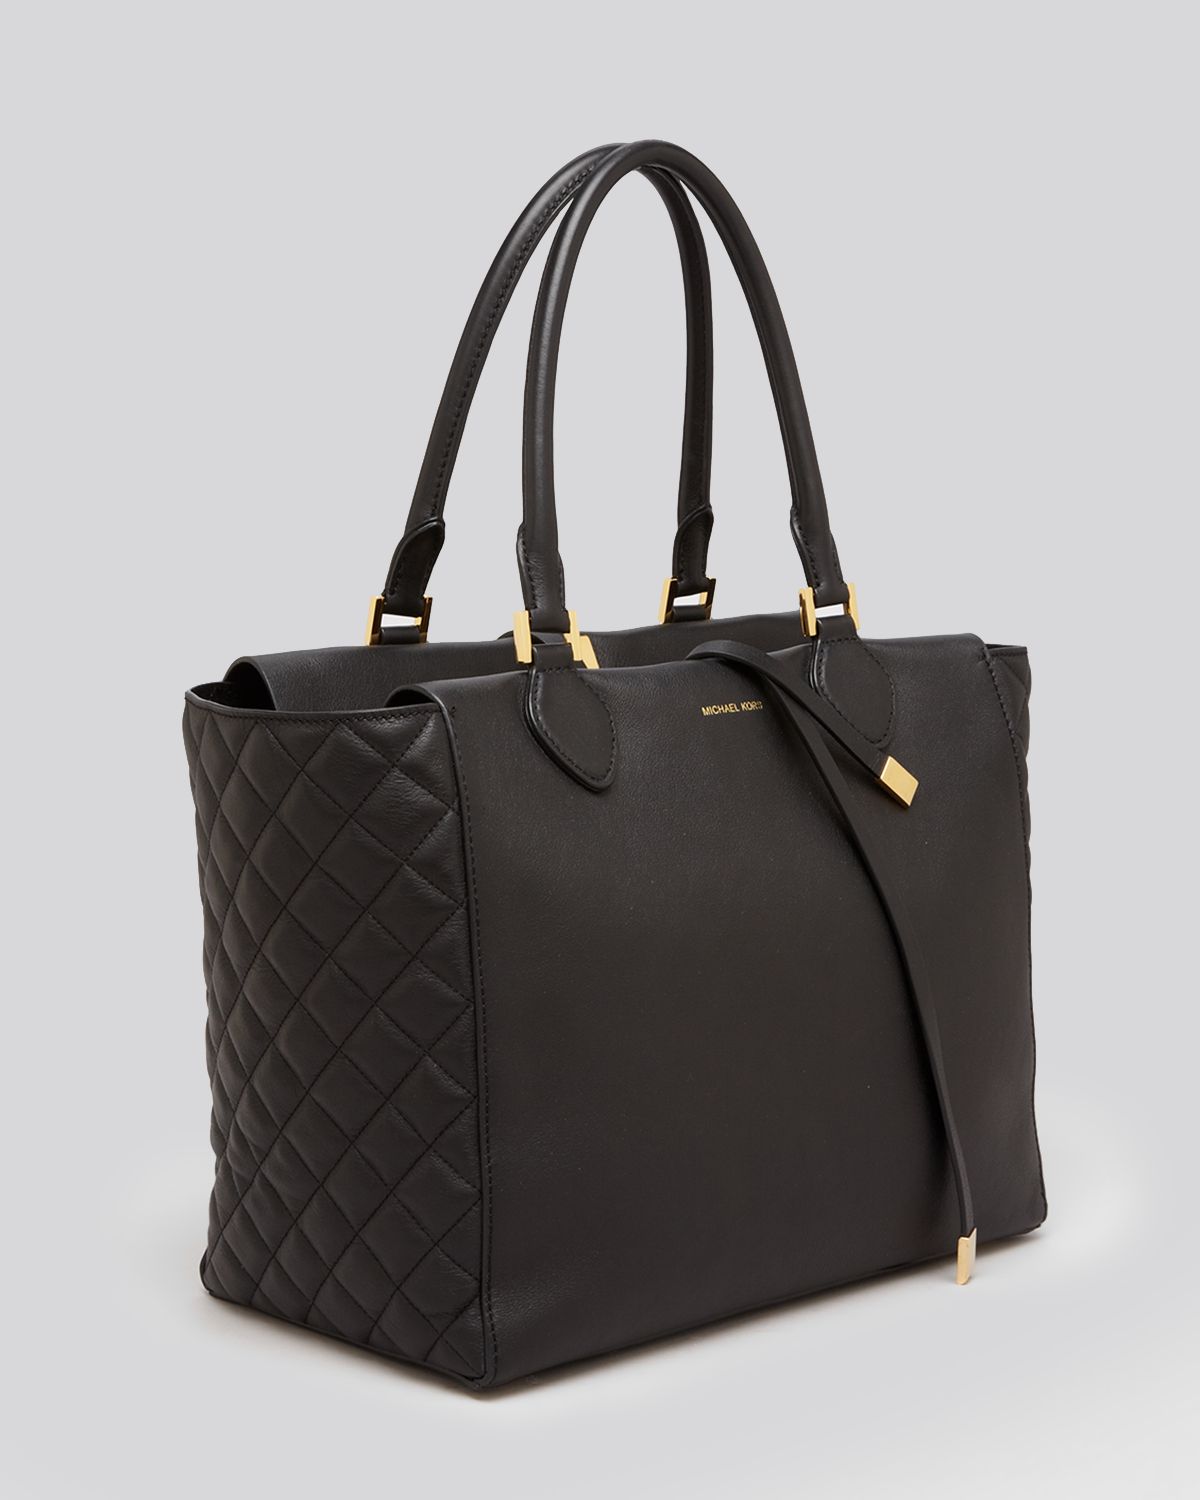 Lyst - Michael Kors Tote Miranda Large Quilted in Black